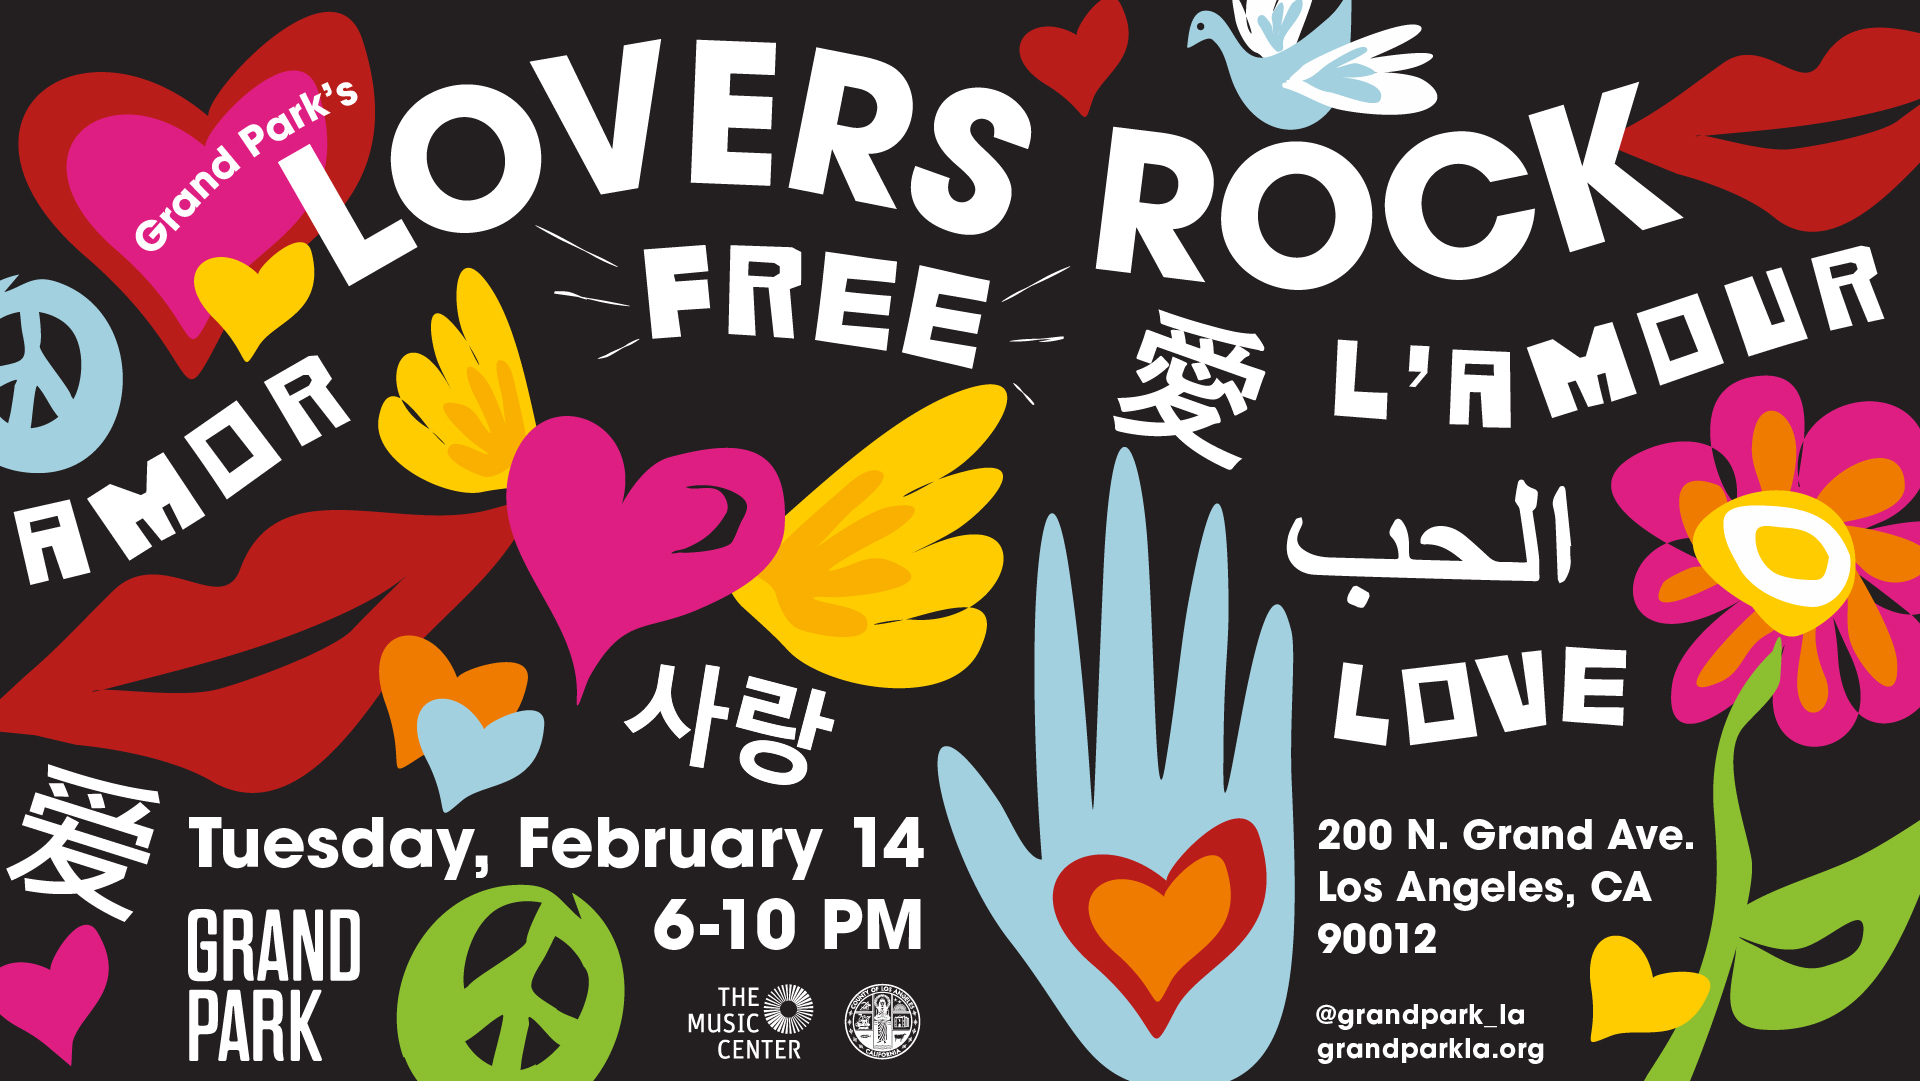 Grand Park's Lovers Rock